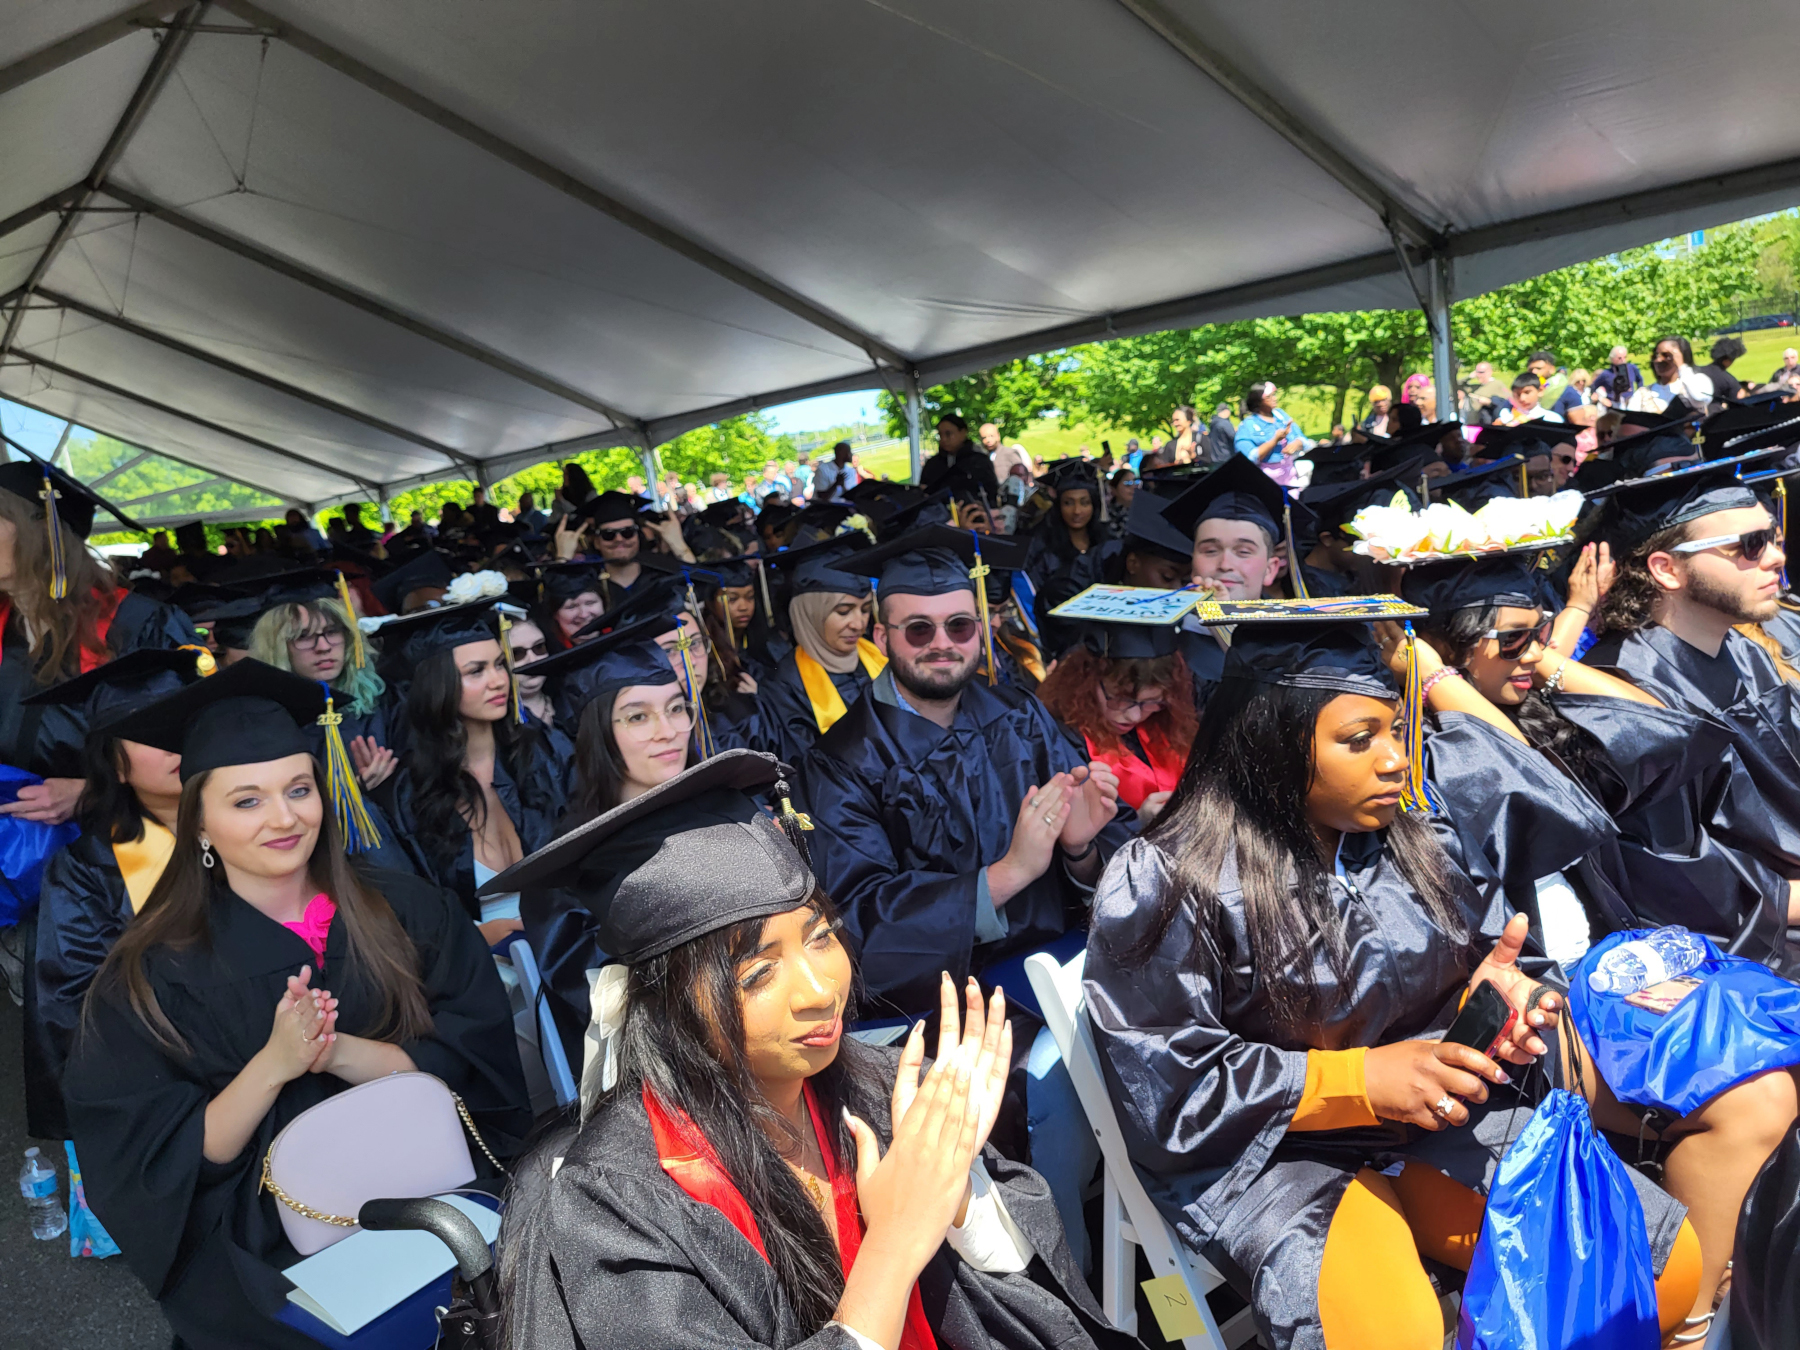 Graduates sitting under tent clapping